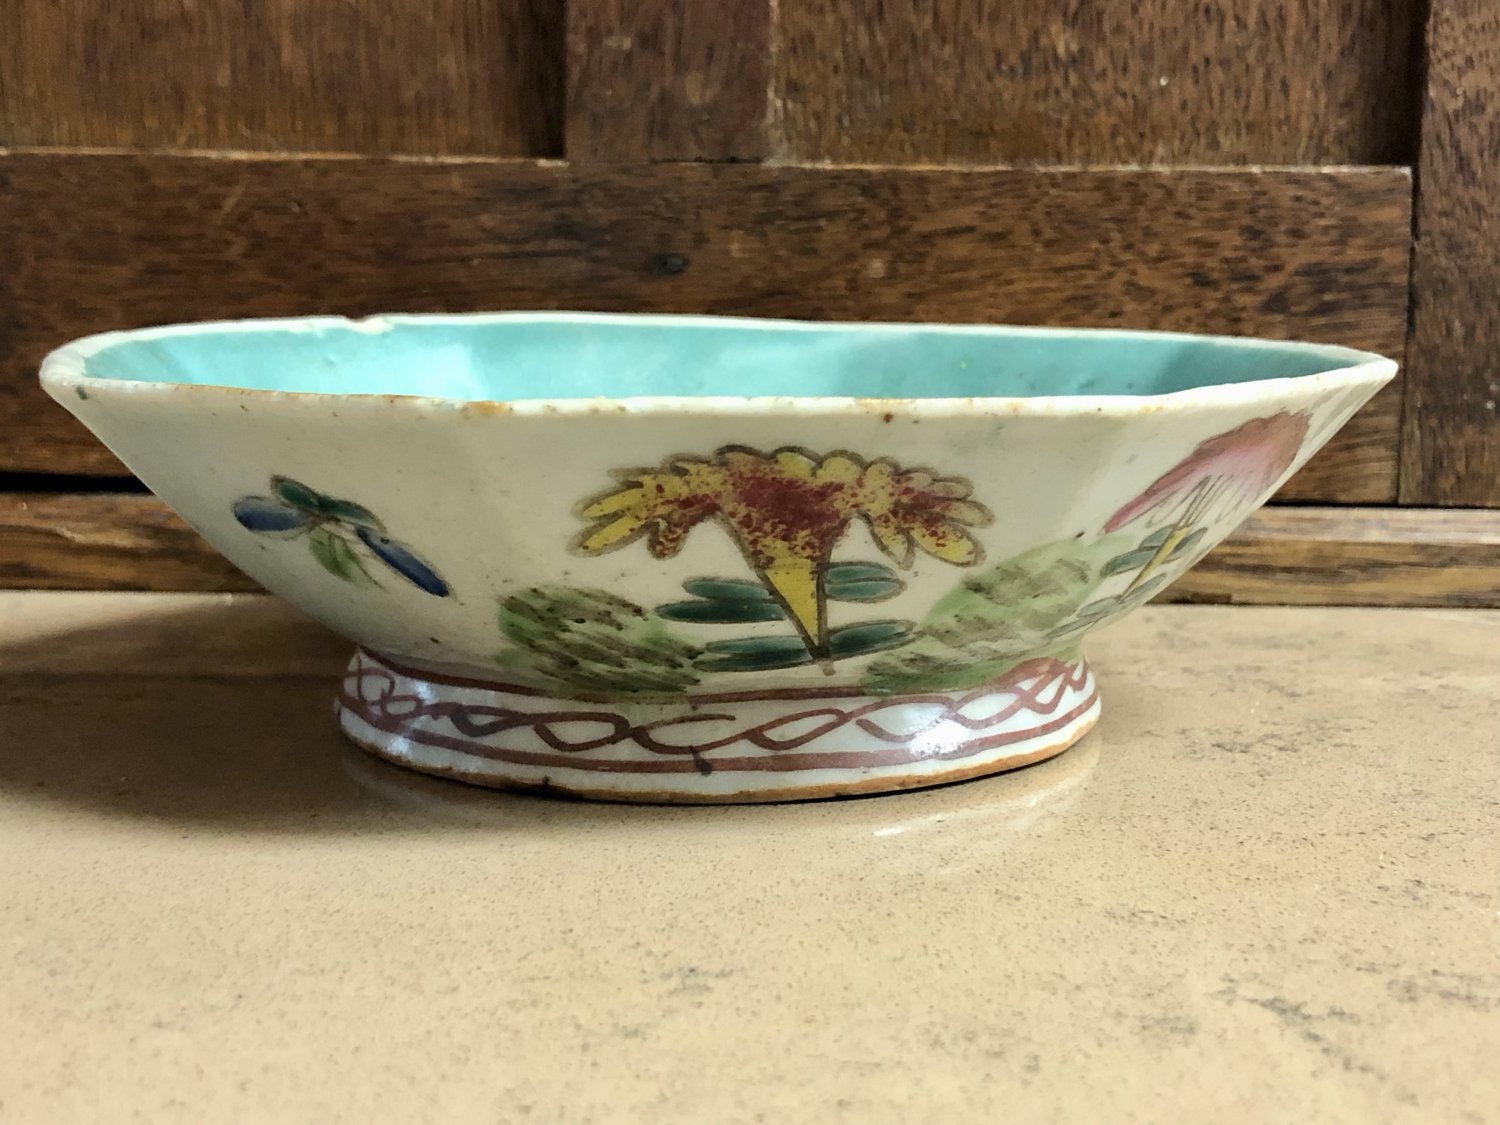 Antique 19th Century Tongzhi Porcelain Footed Bowl with Turquoise Glaze